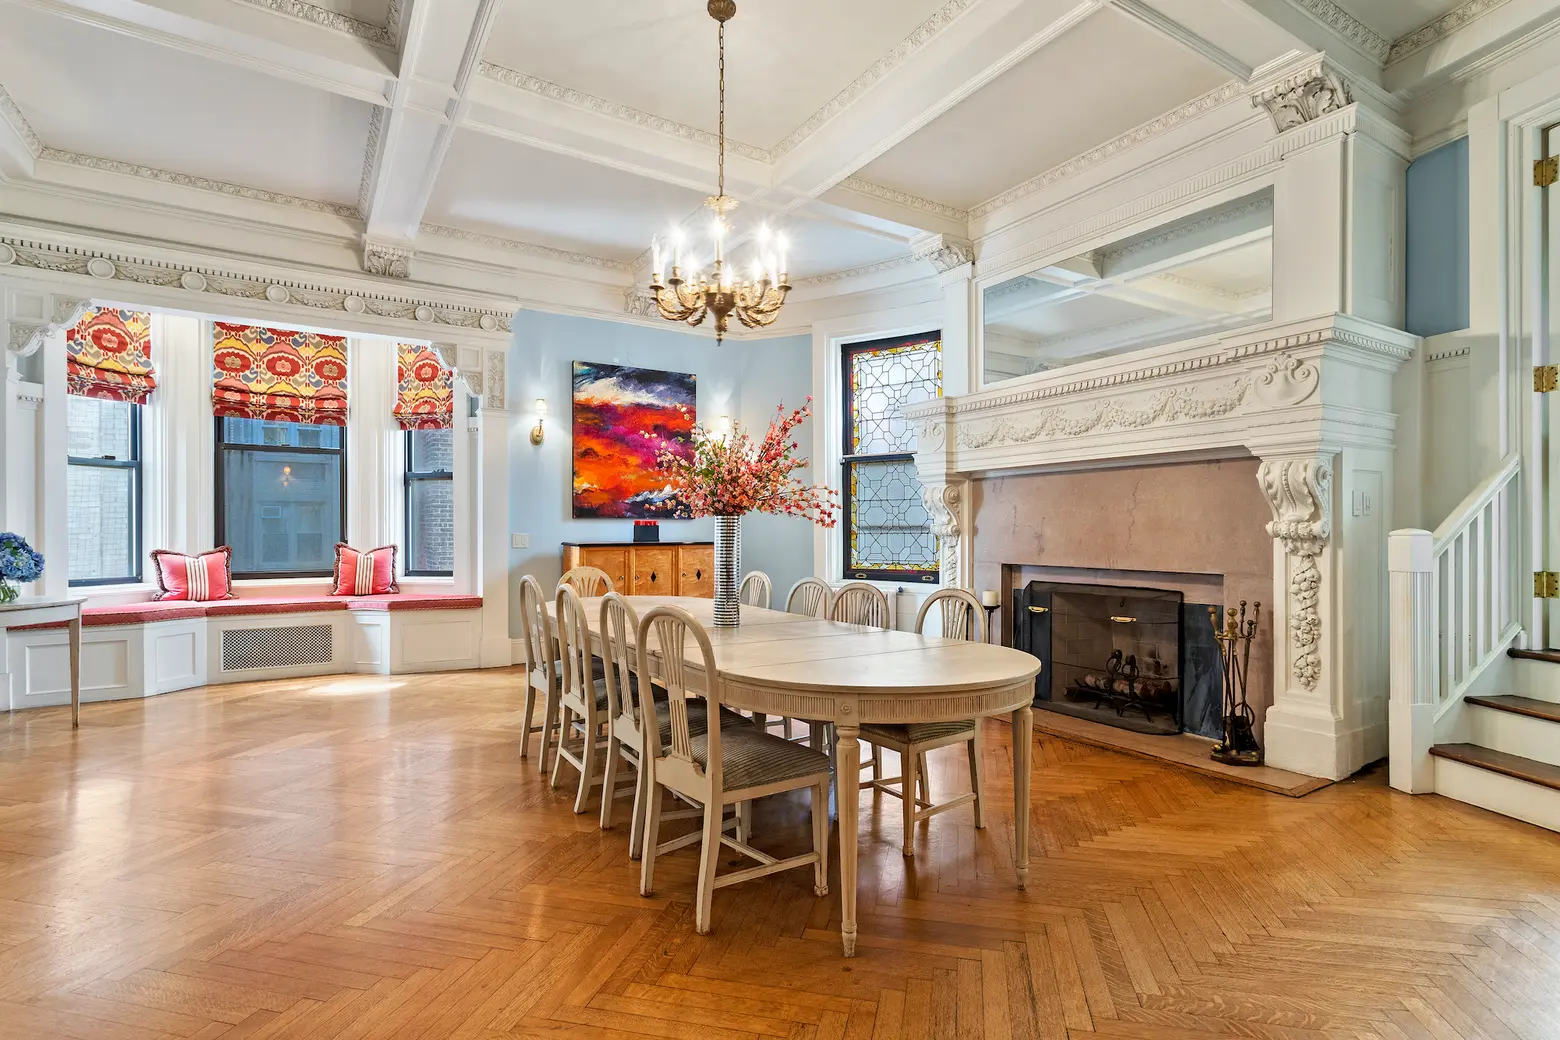 Classic Beaux-Arts details abound at this $3.2M Upper West Side three-bedroom